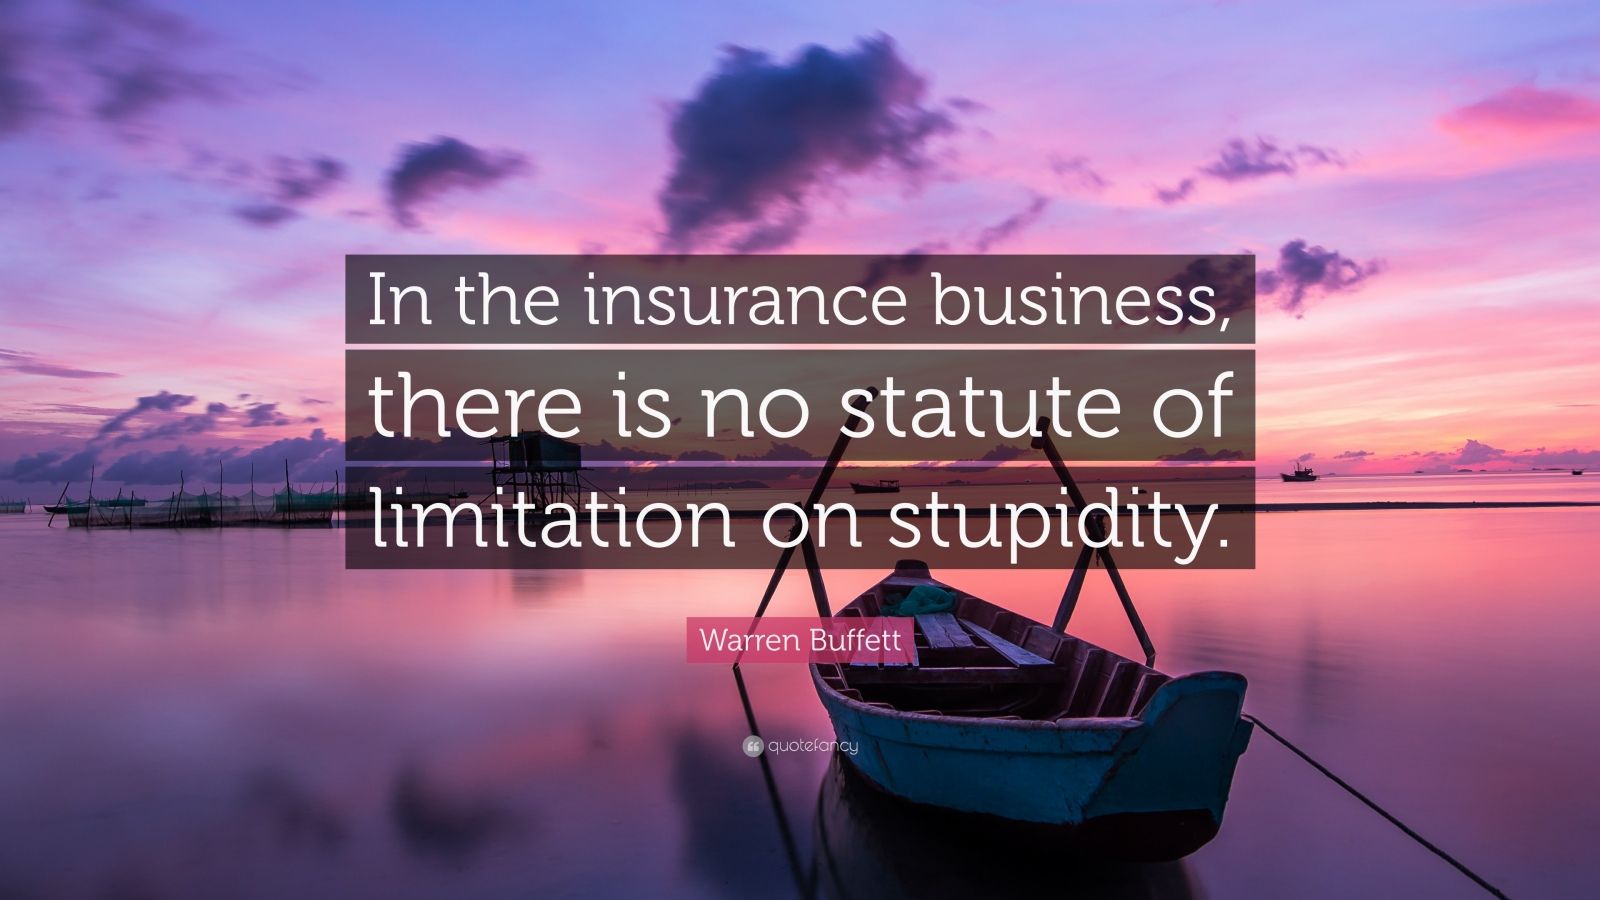 Warren Buffett Quote “In the insurance business, there is